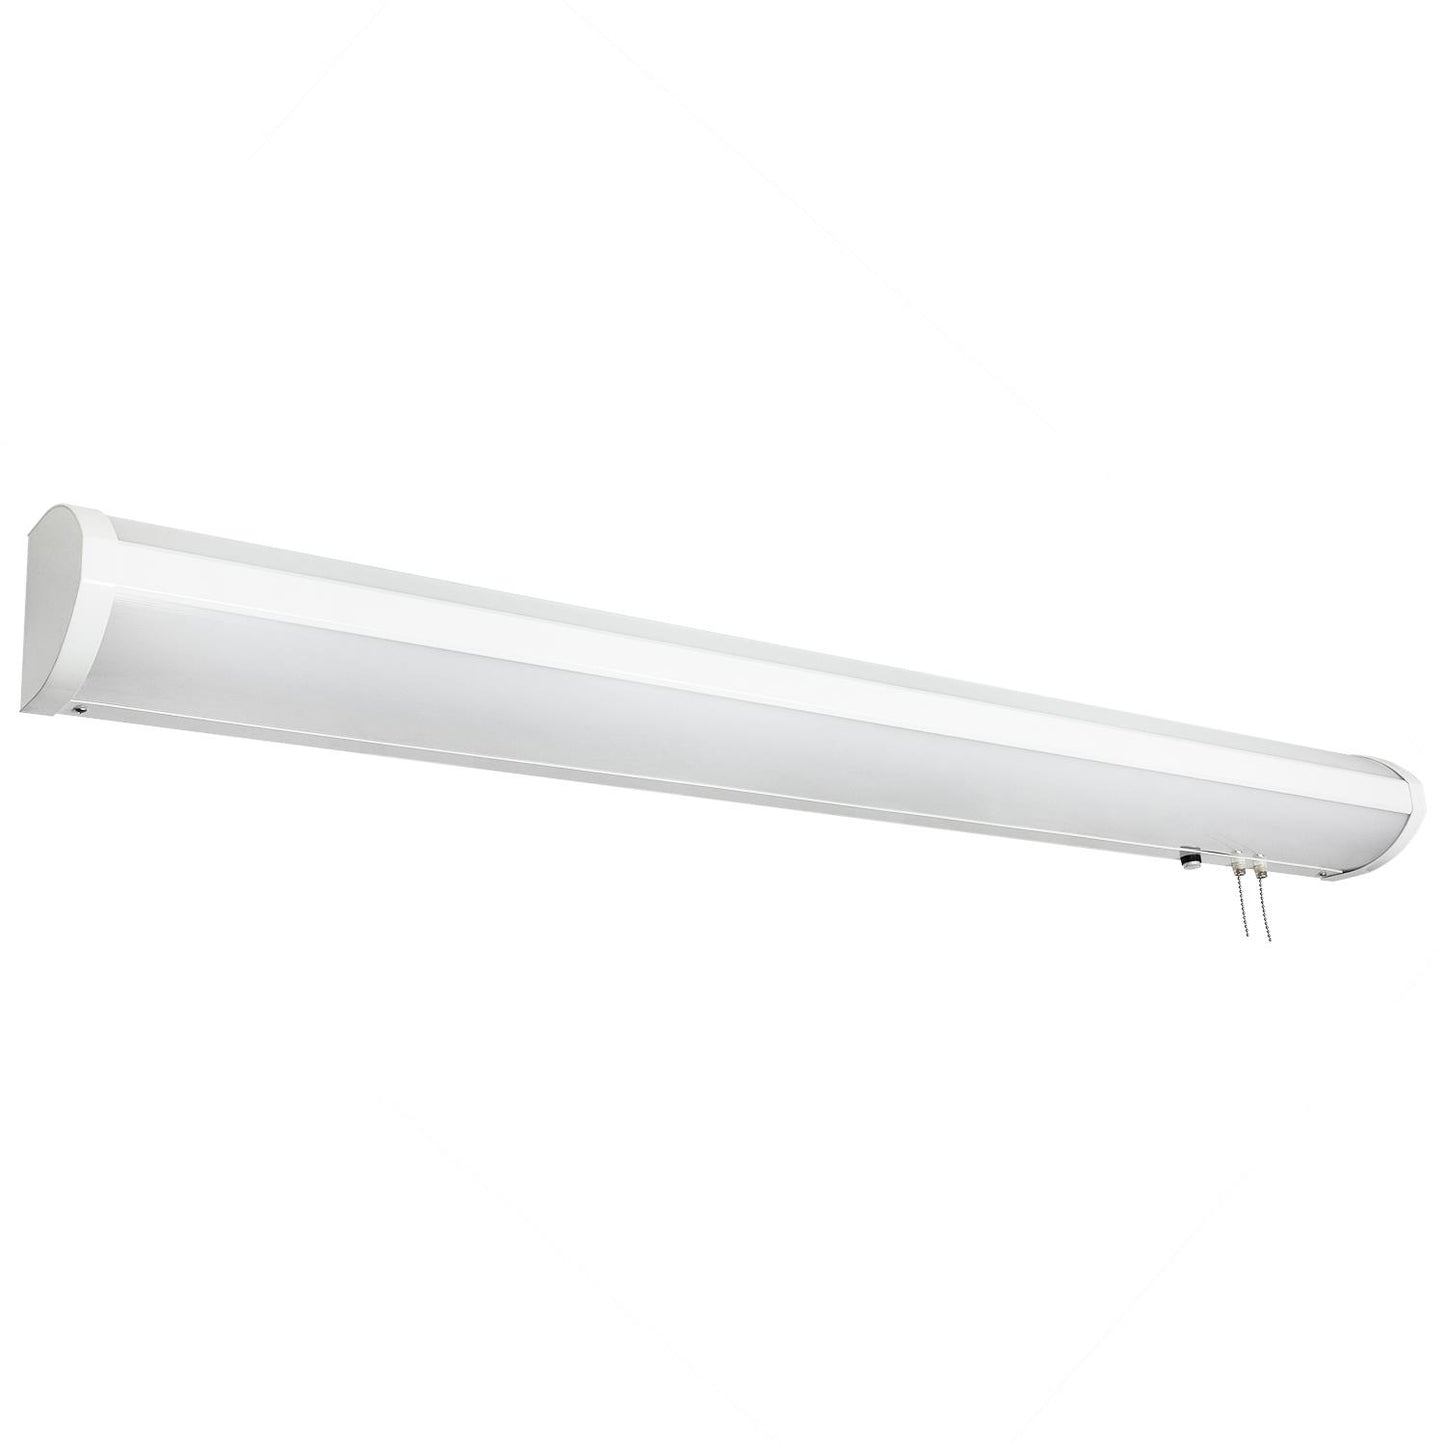 Sunlite LED Linear 48" Bed Light Fixture, 22W-44W, 3-Way Switching (Up/Down/Both), White Finish, 50,000 Hour Life Span, UL Listed